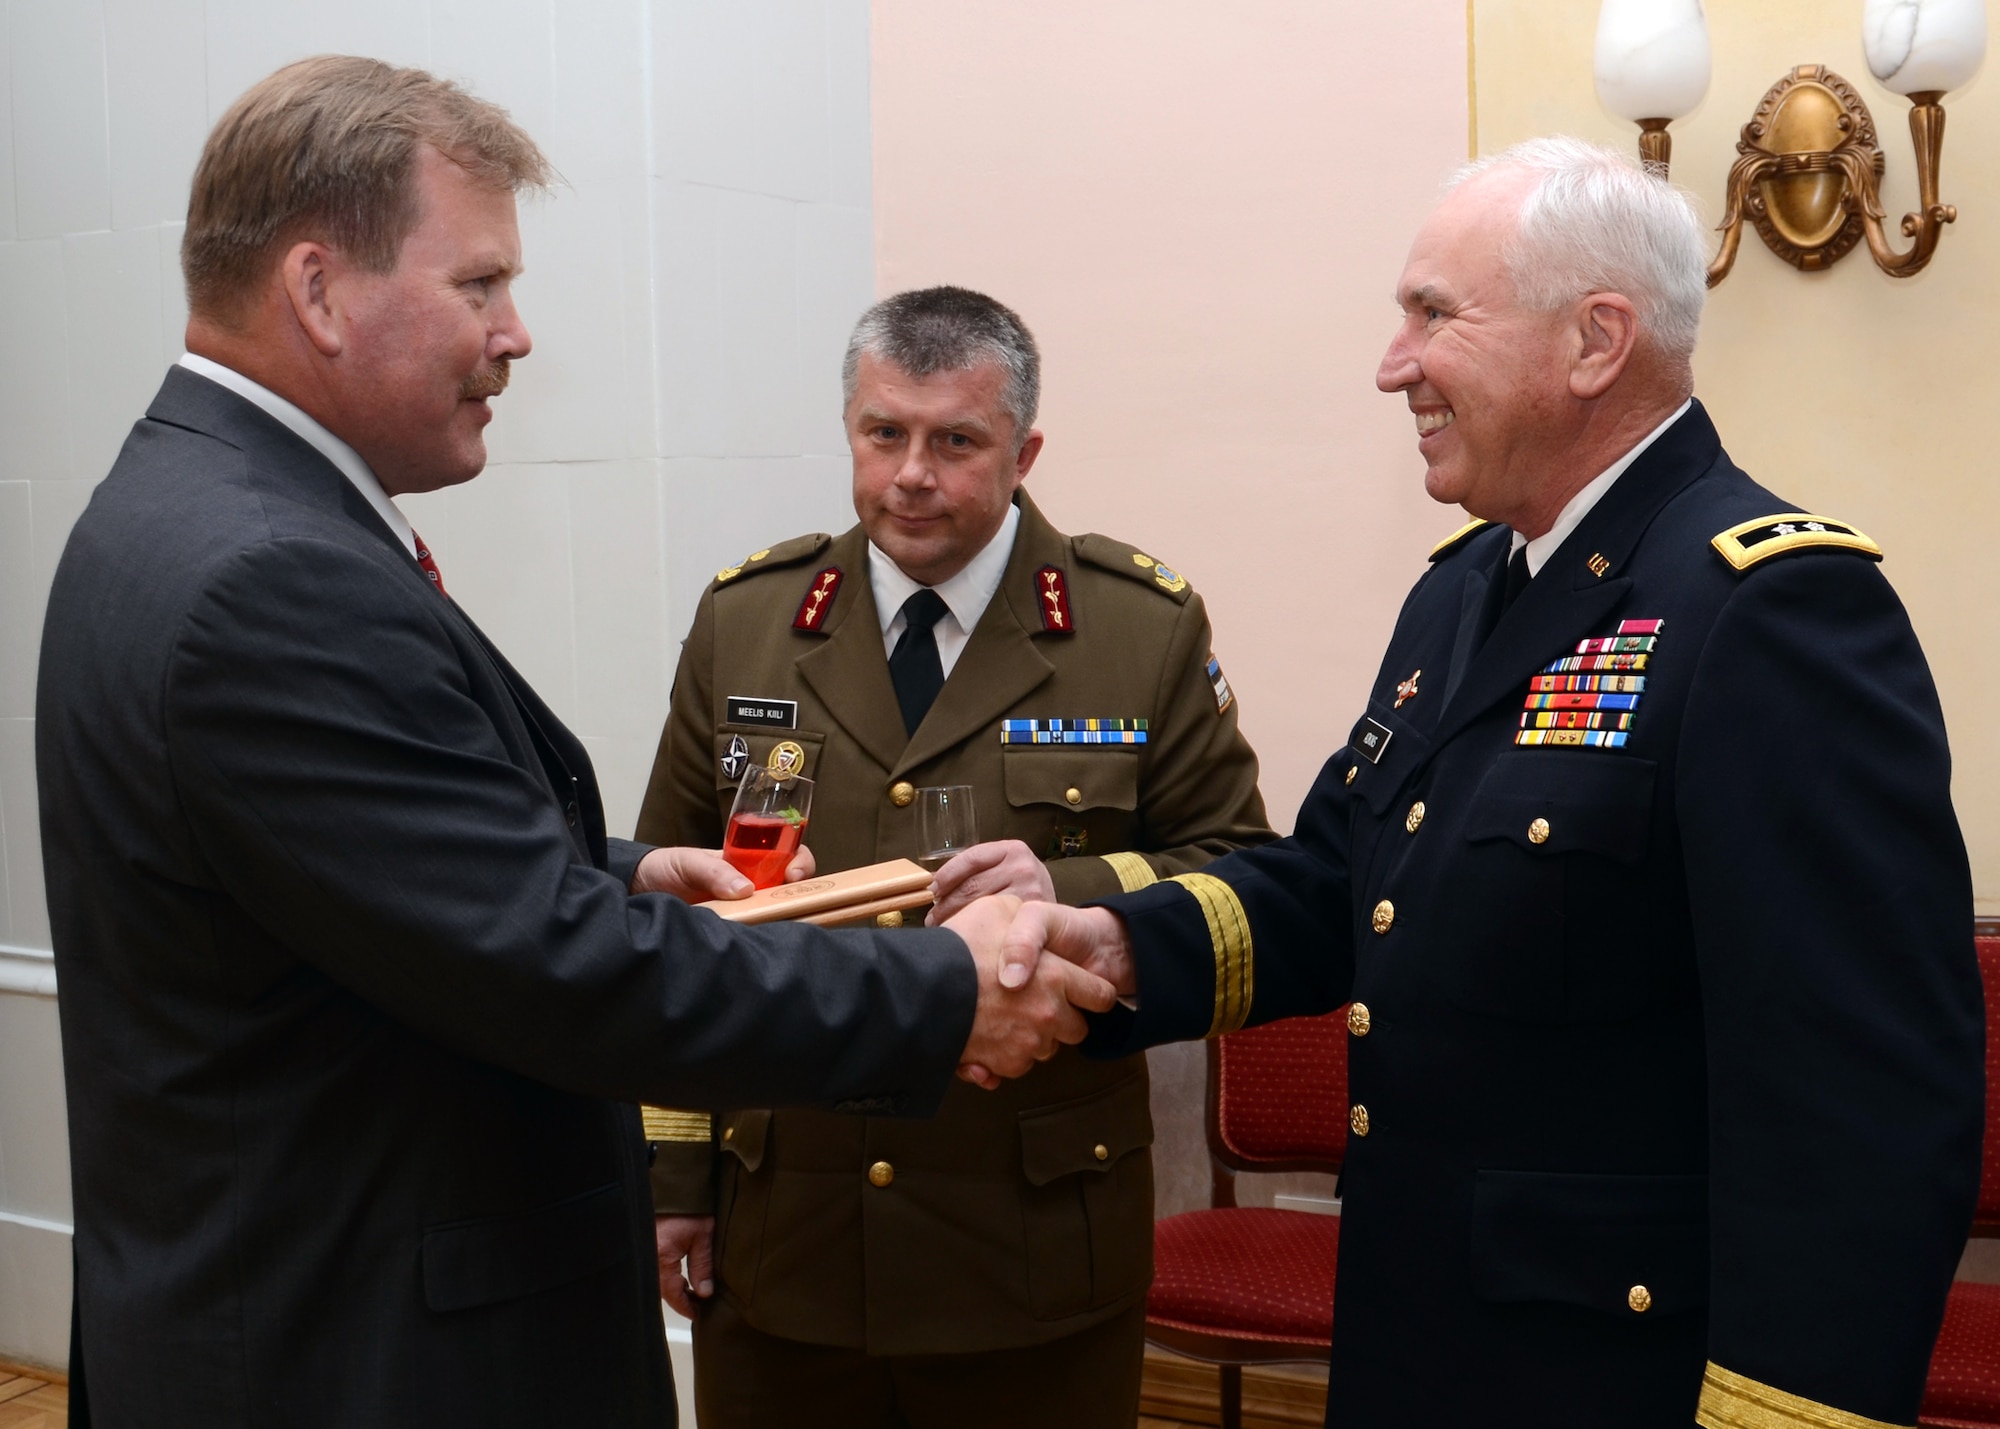 U.S. Army Maj. Gen. James Adkins, The Adjutant General, Maryland National Guard, presents a memento to the Estonian Defense League at Alu Manor in Raplamaa, Estonia is the site for the 20th anniversary celebration state partnership program between the Estonian Military and the Maryland National Guard on June 4, 2013.  Gen. Adkins traveled to Estonia to celebrate this accomplishment during Sabre Strike 2013.  Saber Strike 2013 is a U.S. Army Europe-led, multinational, tactical field training and command post exercise occurring in Lithuania, Latvia and Estonia June 3-14 that involves more than 2,000 personnel from 14 different countries. The exercise trains participants on command and control as well as interoperability with regional partners and is designed to improve  joint, multinational capability in a variety of missions and to prepare participants to support multinational contingency operations worldwide. (U.S. Air National Guard photo by Staff Sgt. Benjamin Hughes)